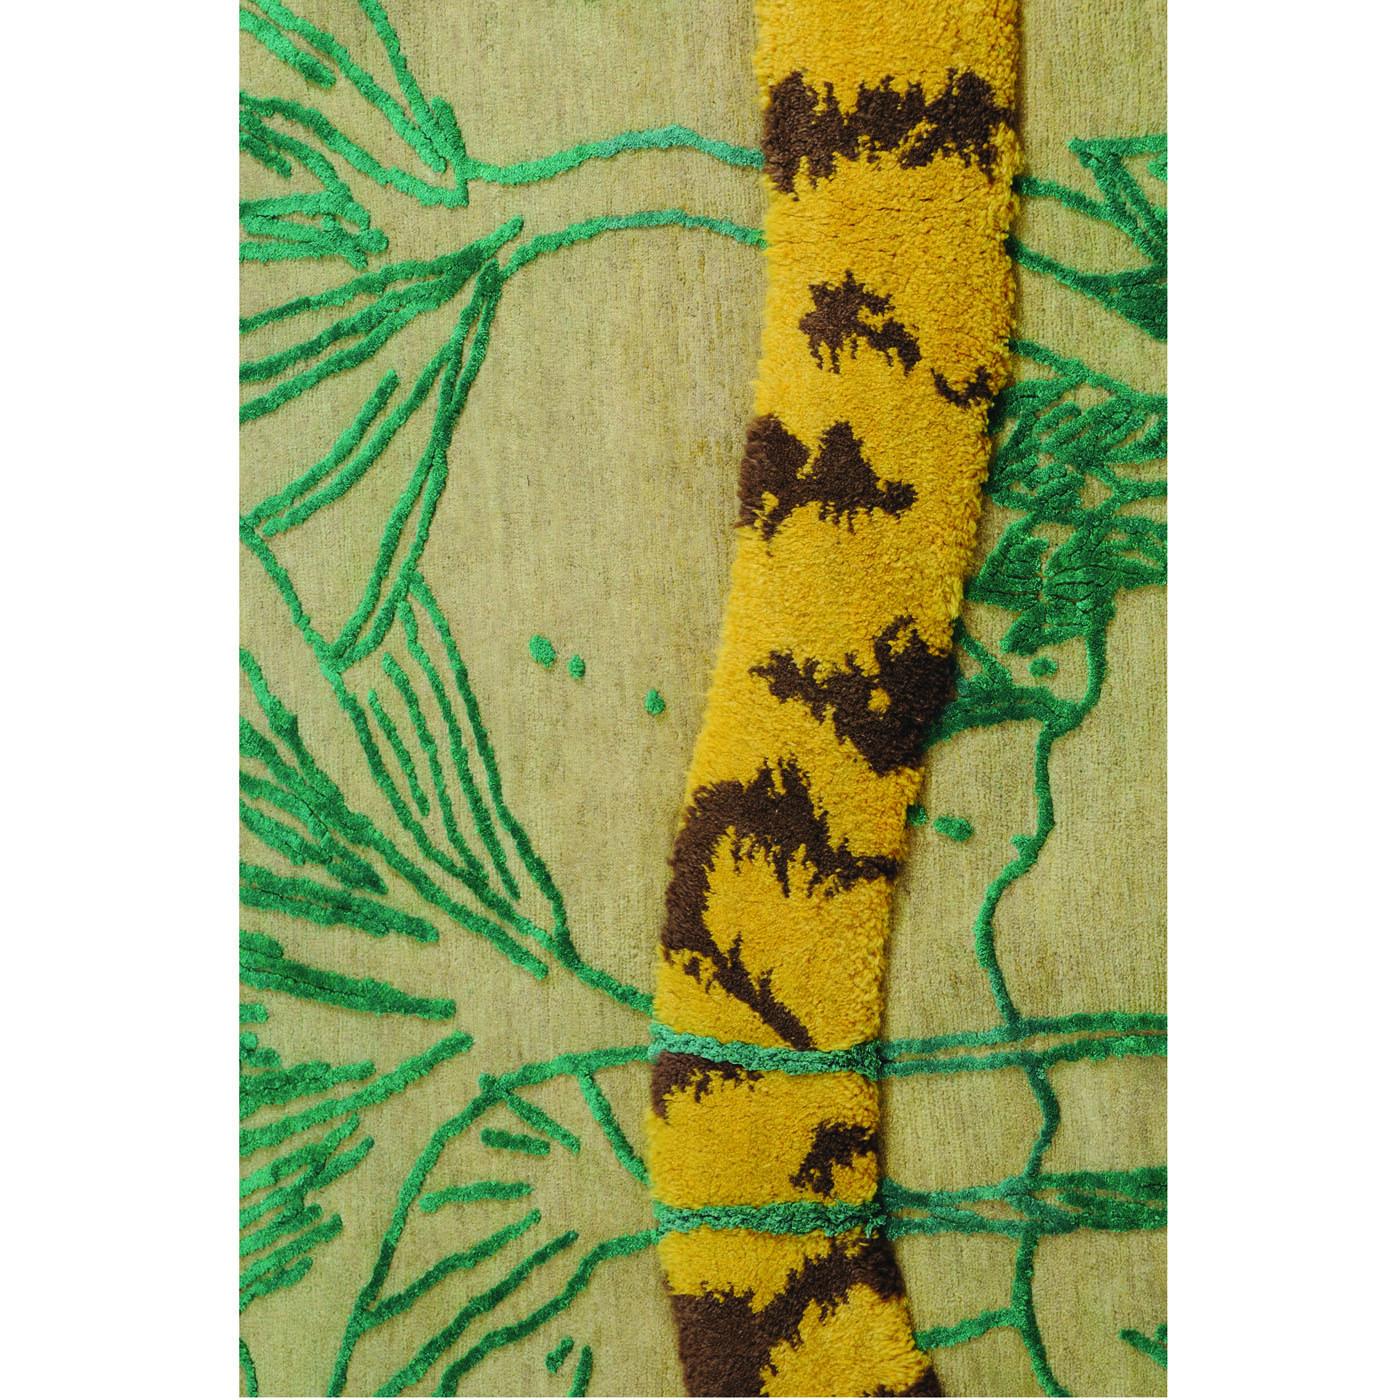 This contemporary rectangular rug will make a striking statement when placed in any room in the home. The background is in ivory wool and bares a green hand knotted linear leaf-like pattern representative of a jungle. In the central section of the